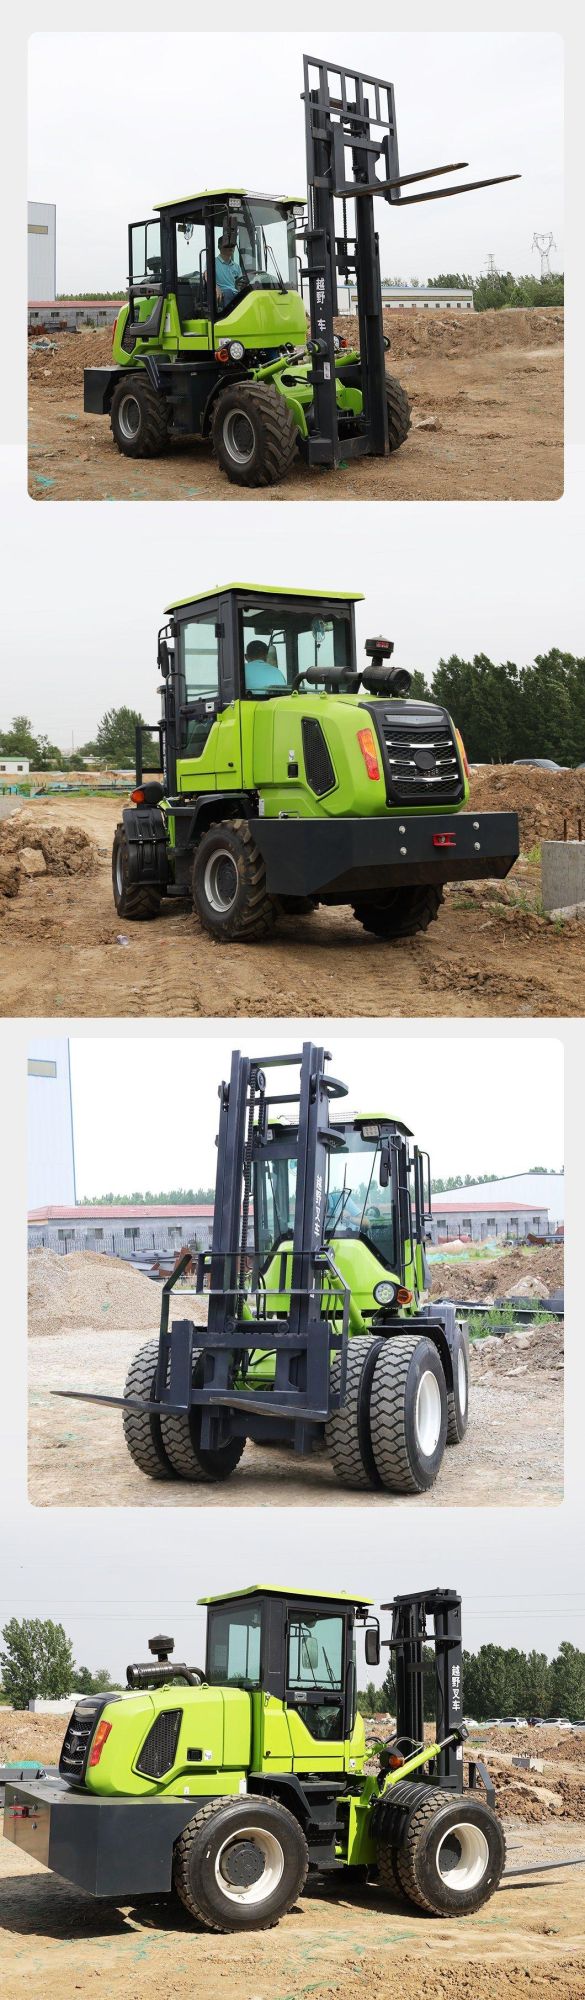 China Cheap Forklift 2ton 2.5ton 3ton 4X4 All Rough Terrain Diesel Forklifts for Sale Price